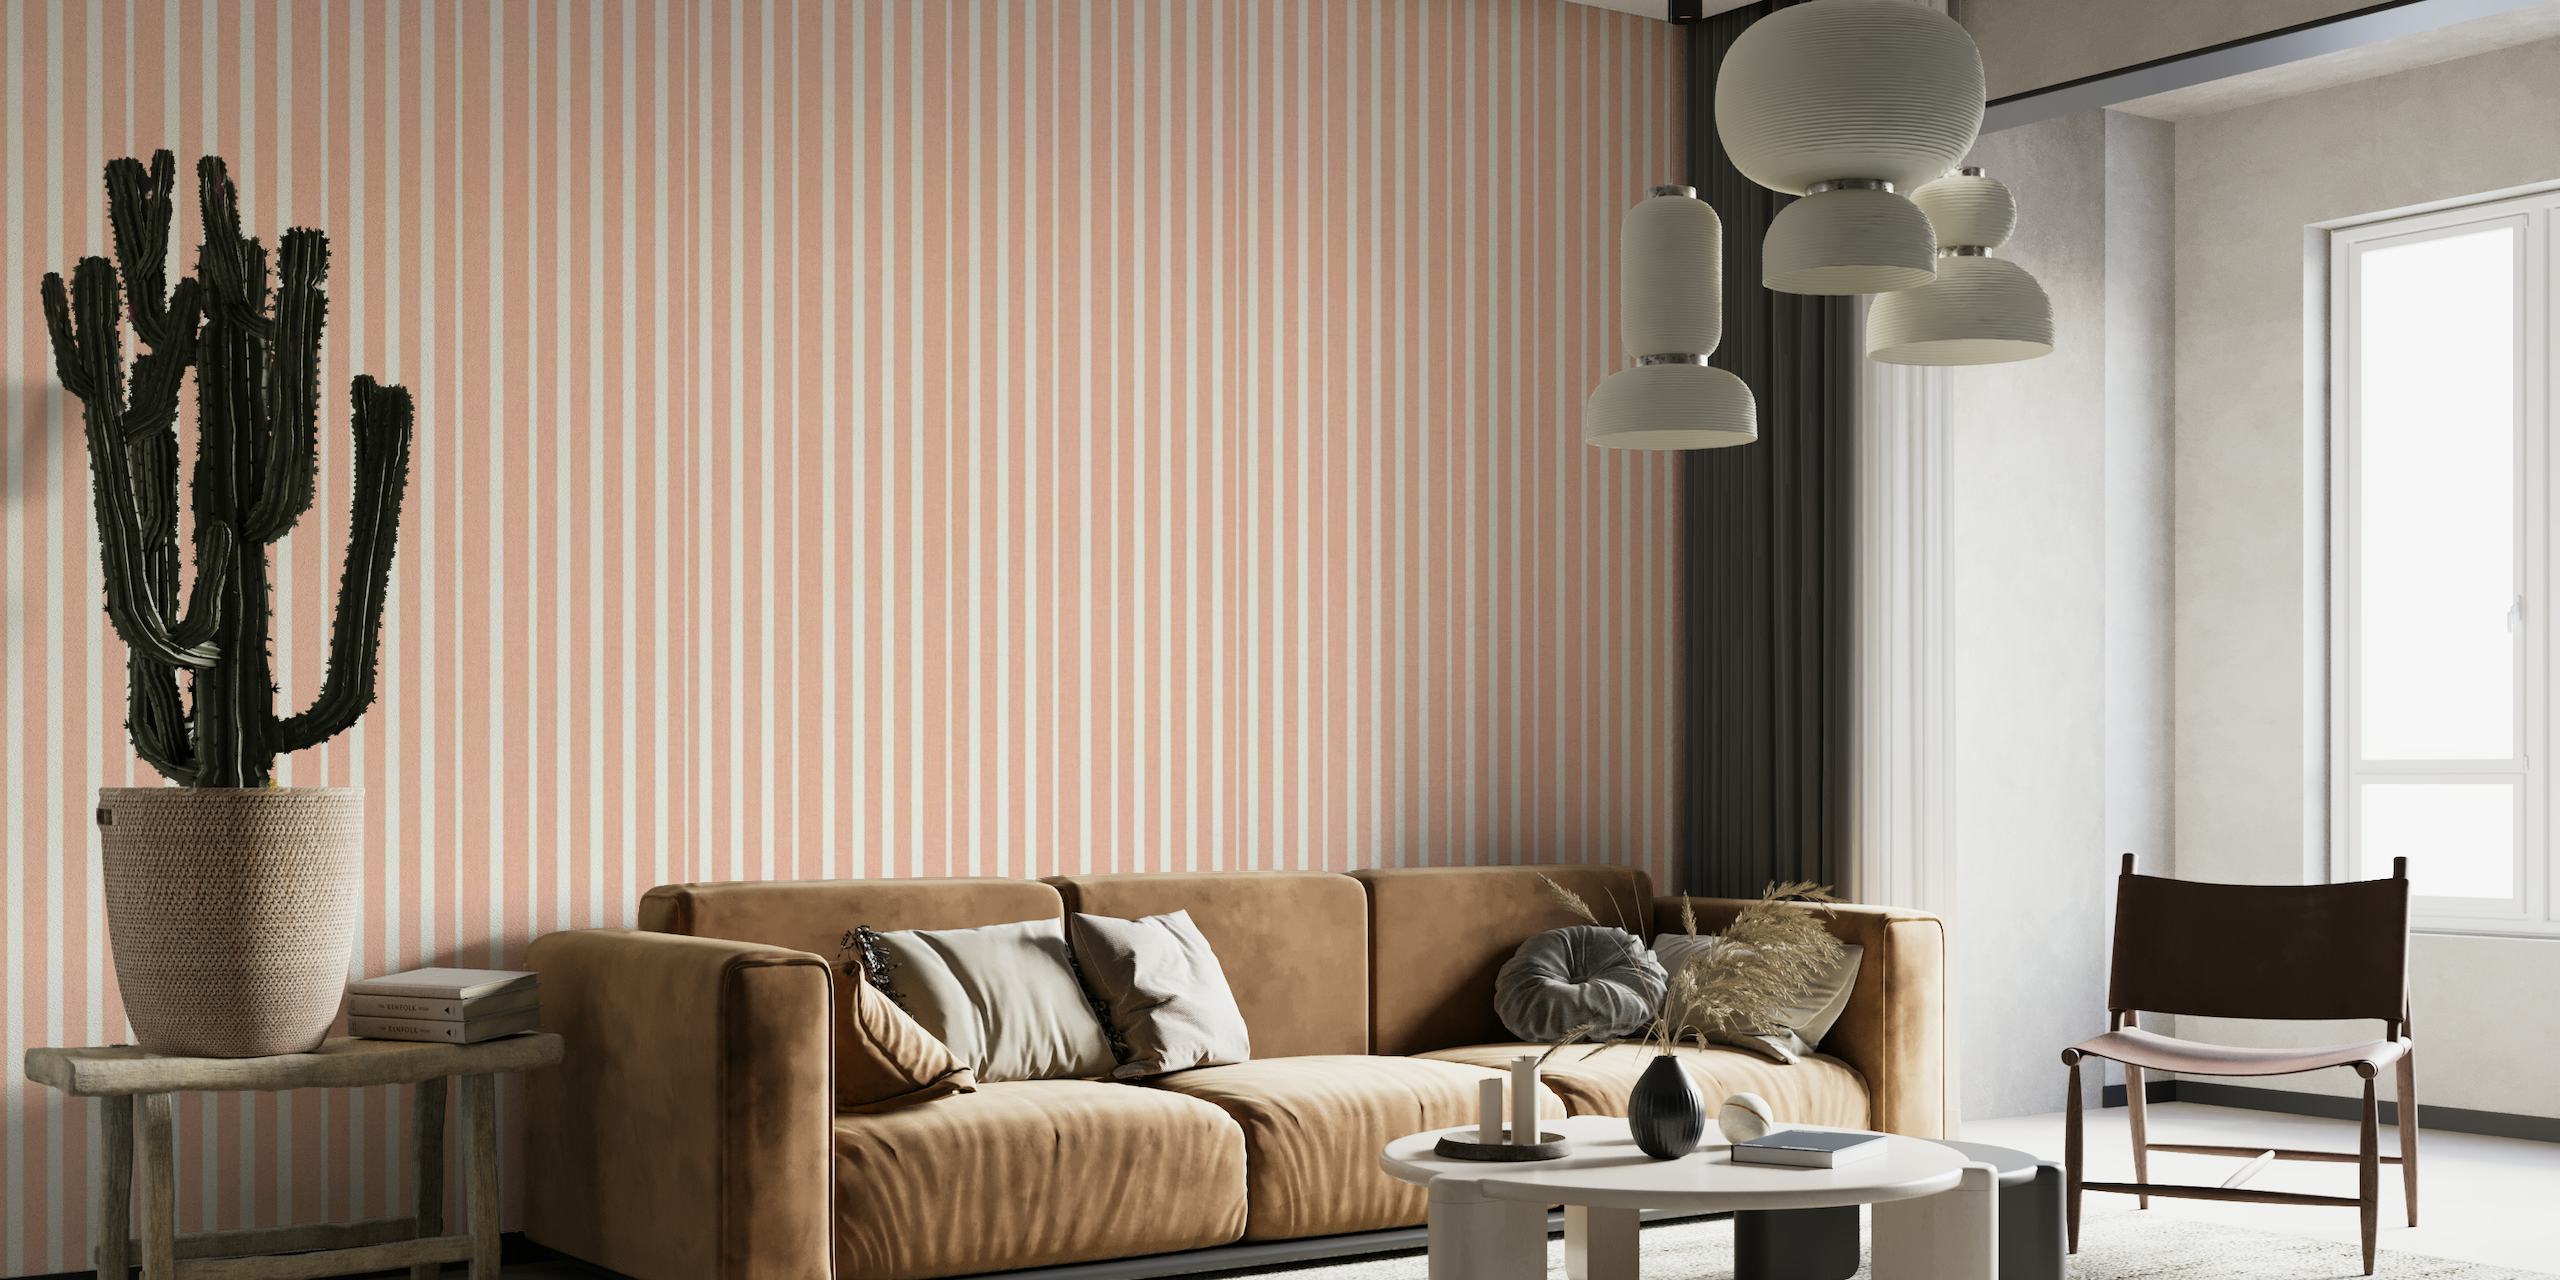 Retro Stripes Coral Wall Mural with Soft Warm Tones